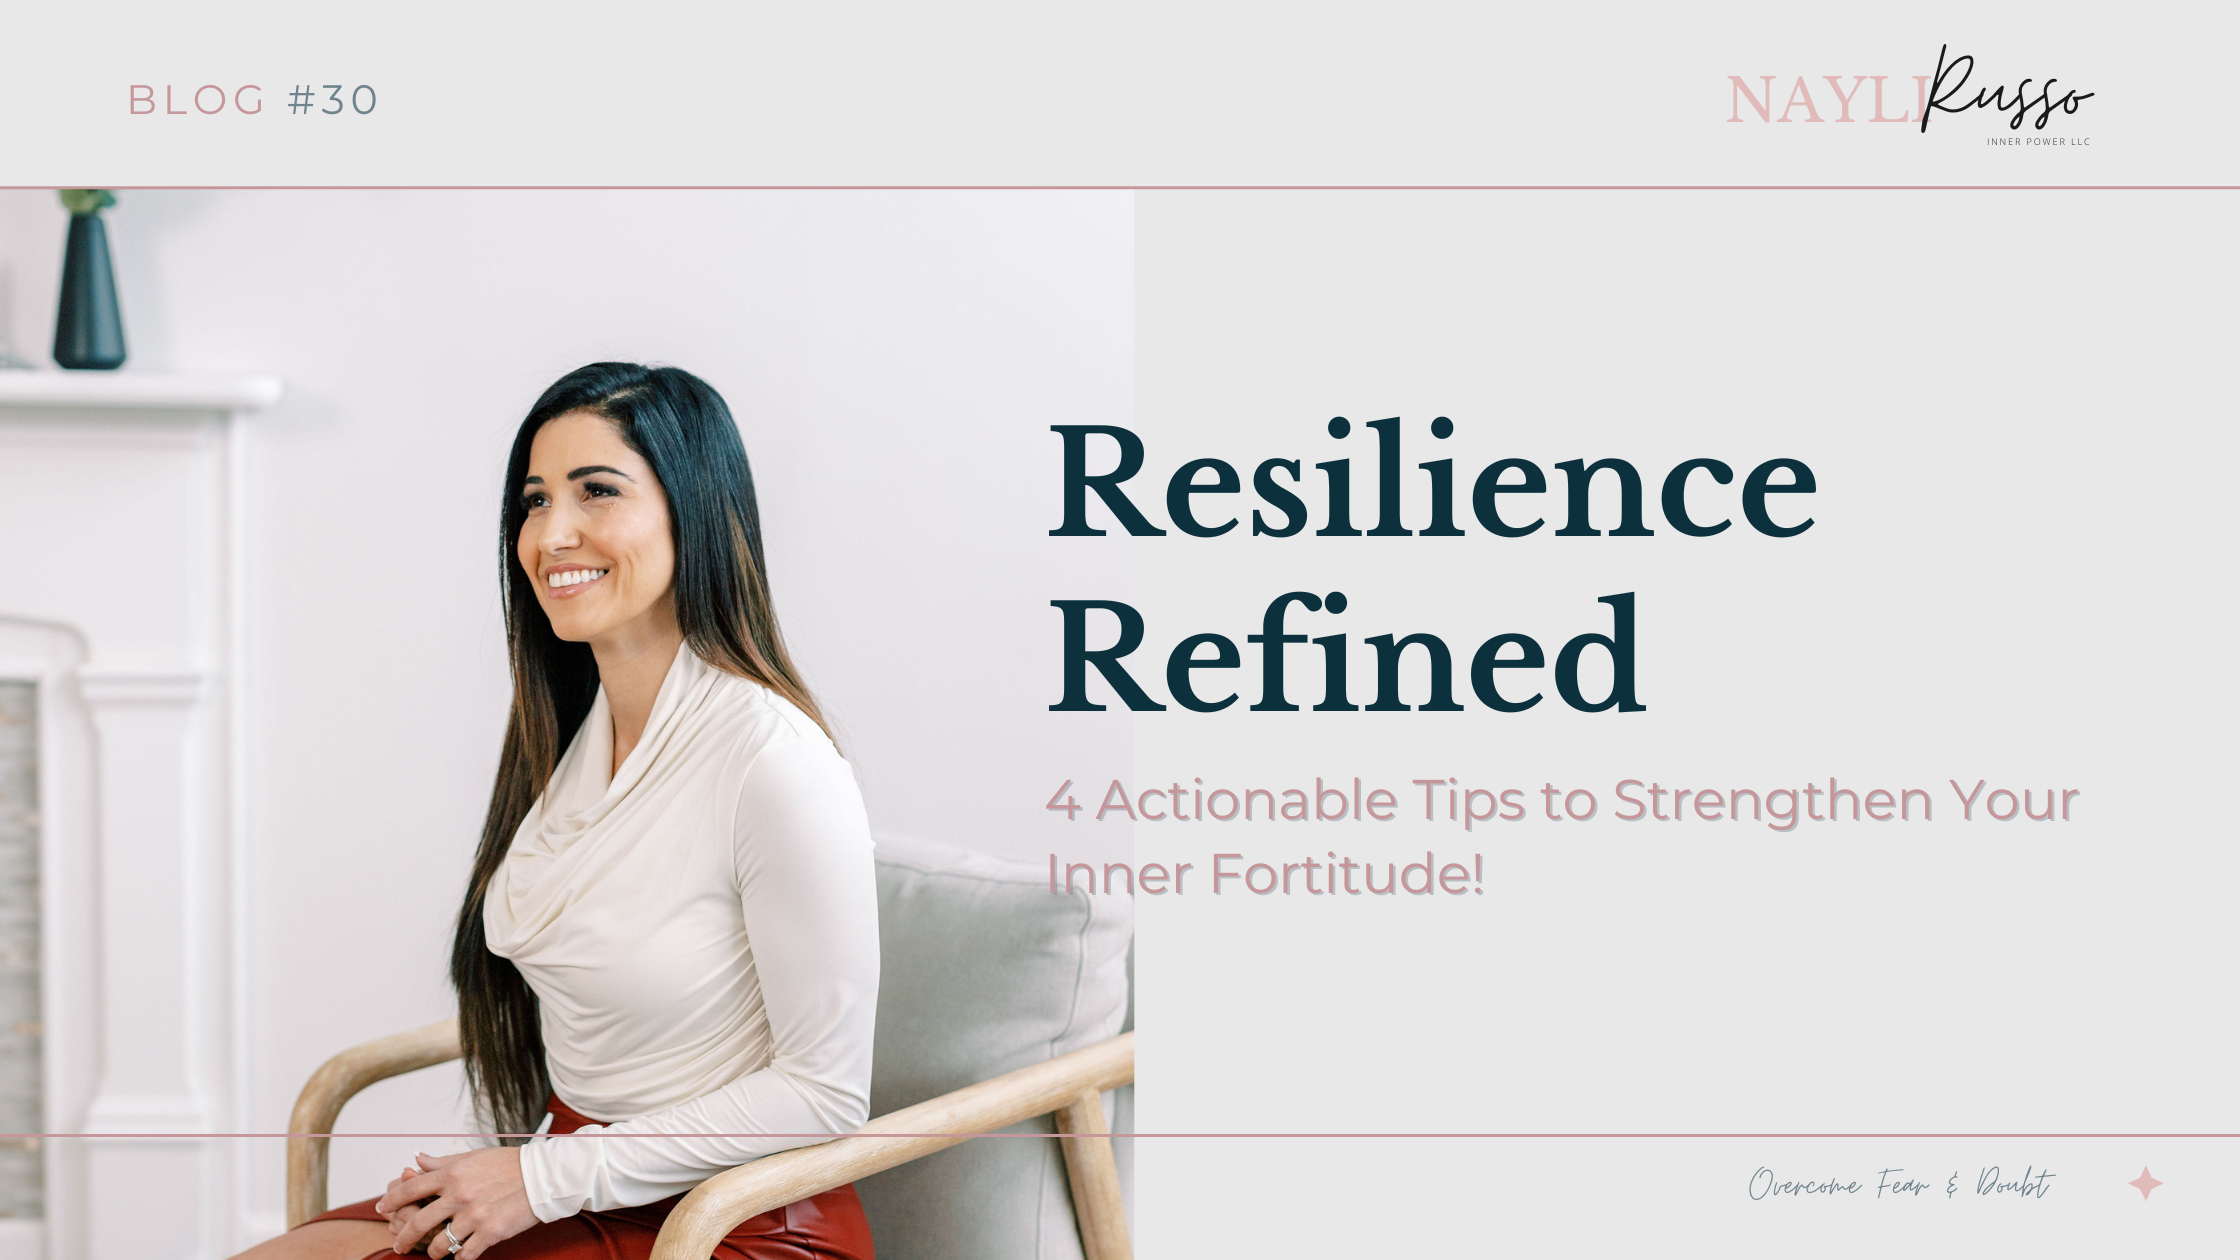 4 Actionable Tips to Improve Resilience

